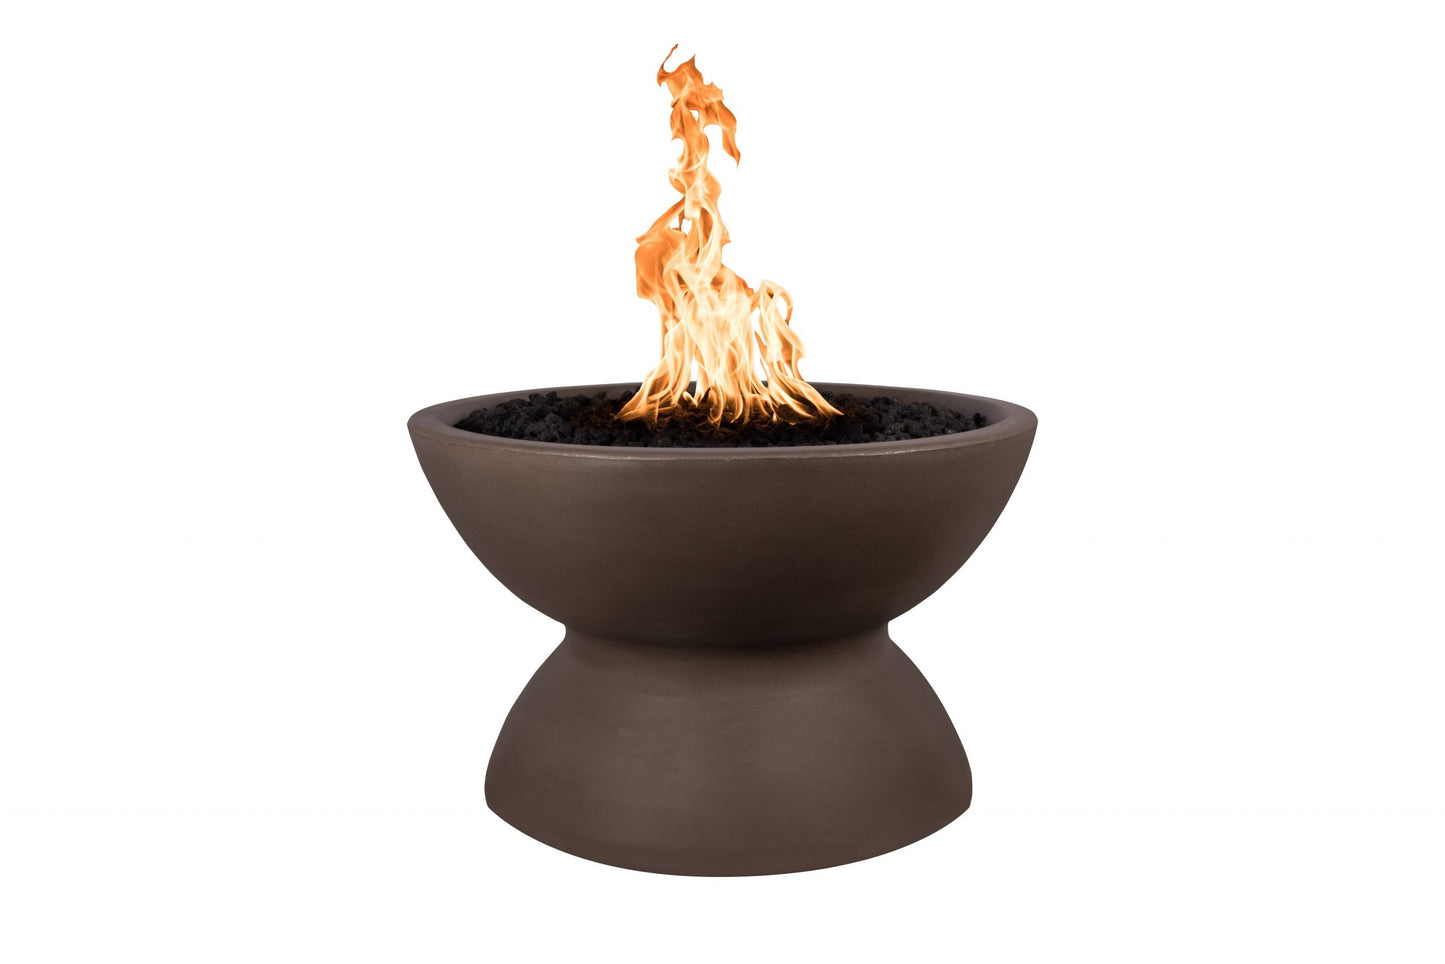 The Outdoor Plus Round Copa 33" Metallic Pearl GFRC Concrete Liquid Propane Fire Pit with 12V Electronic Ignition